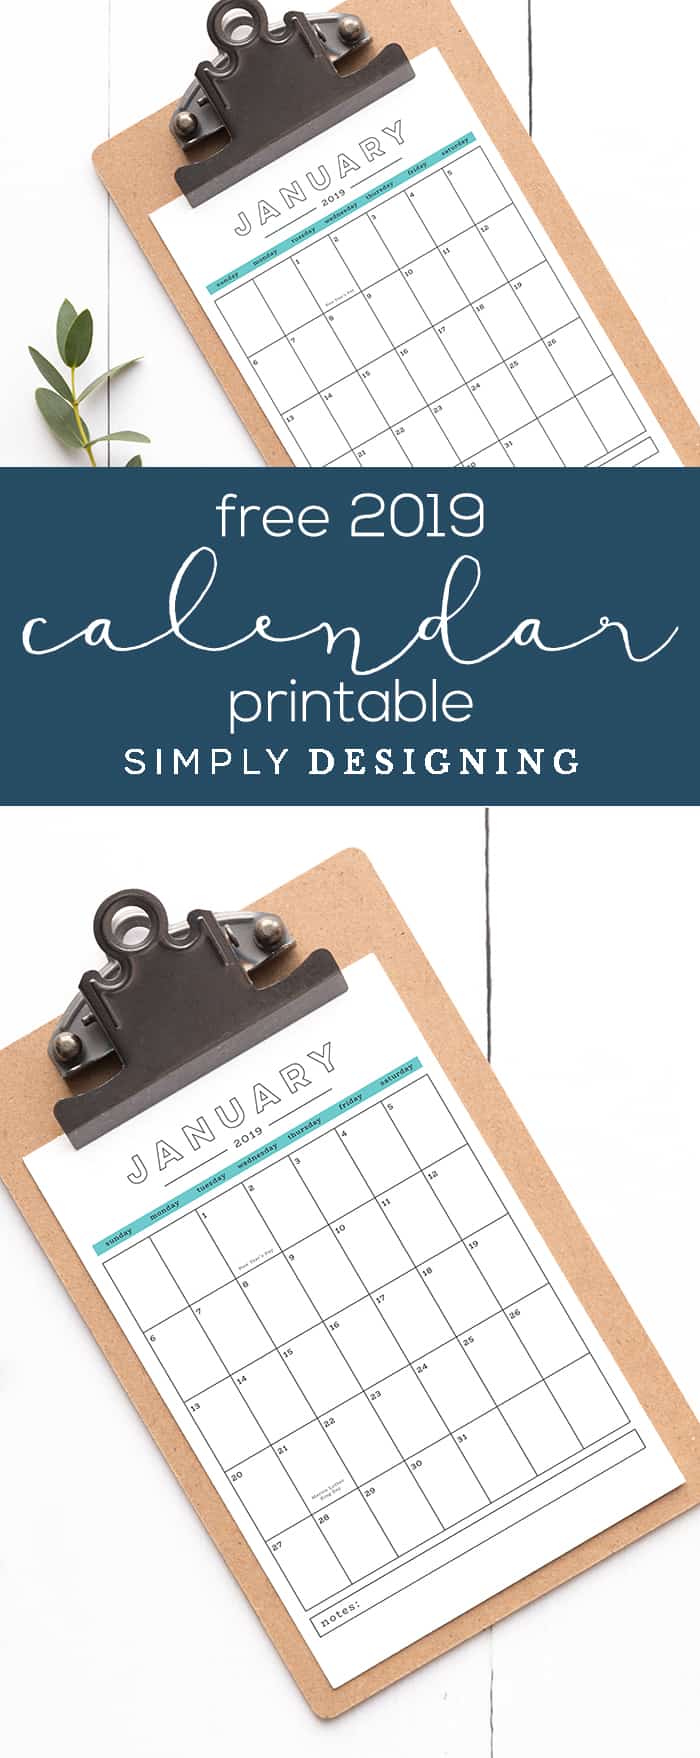 This free 2019 printable calendar is beautiful and functional and is yours to use for FREE